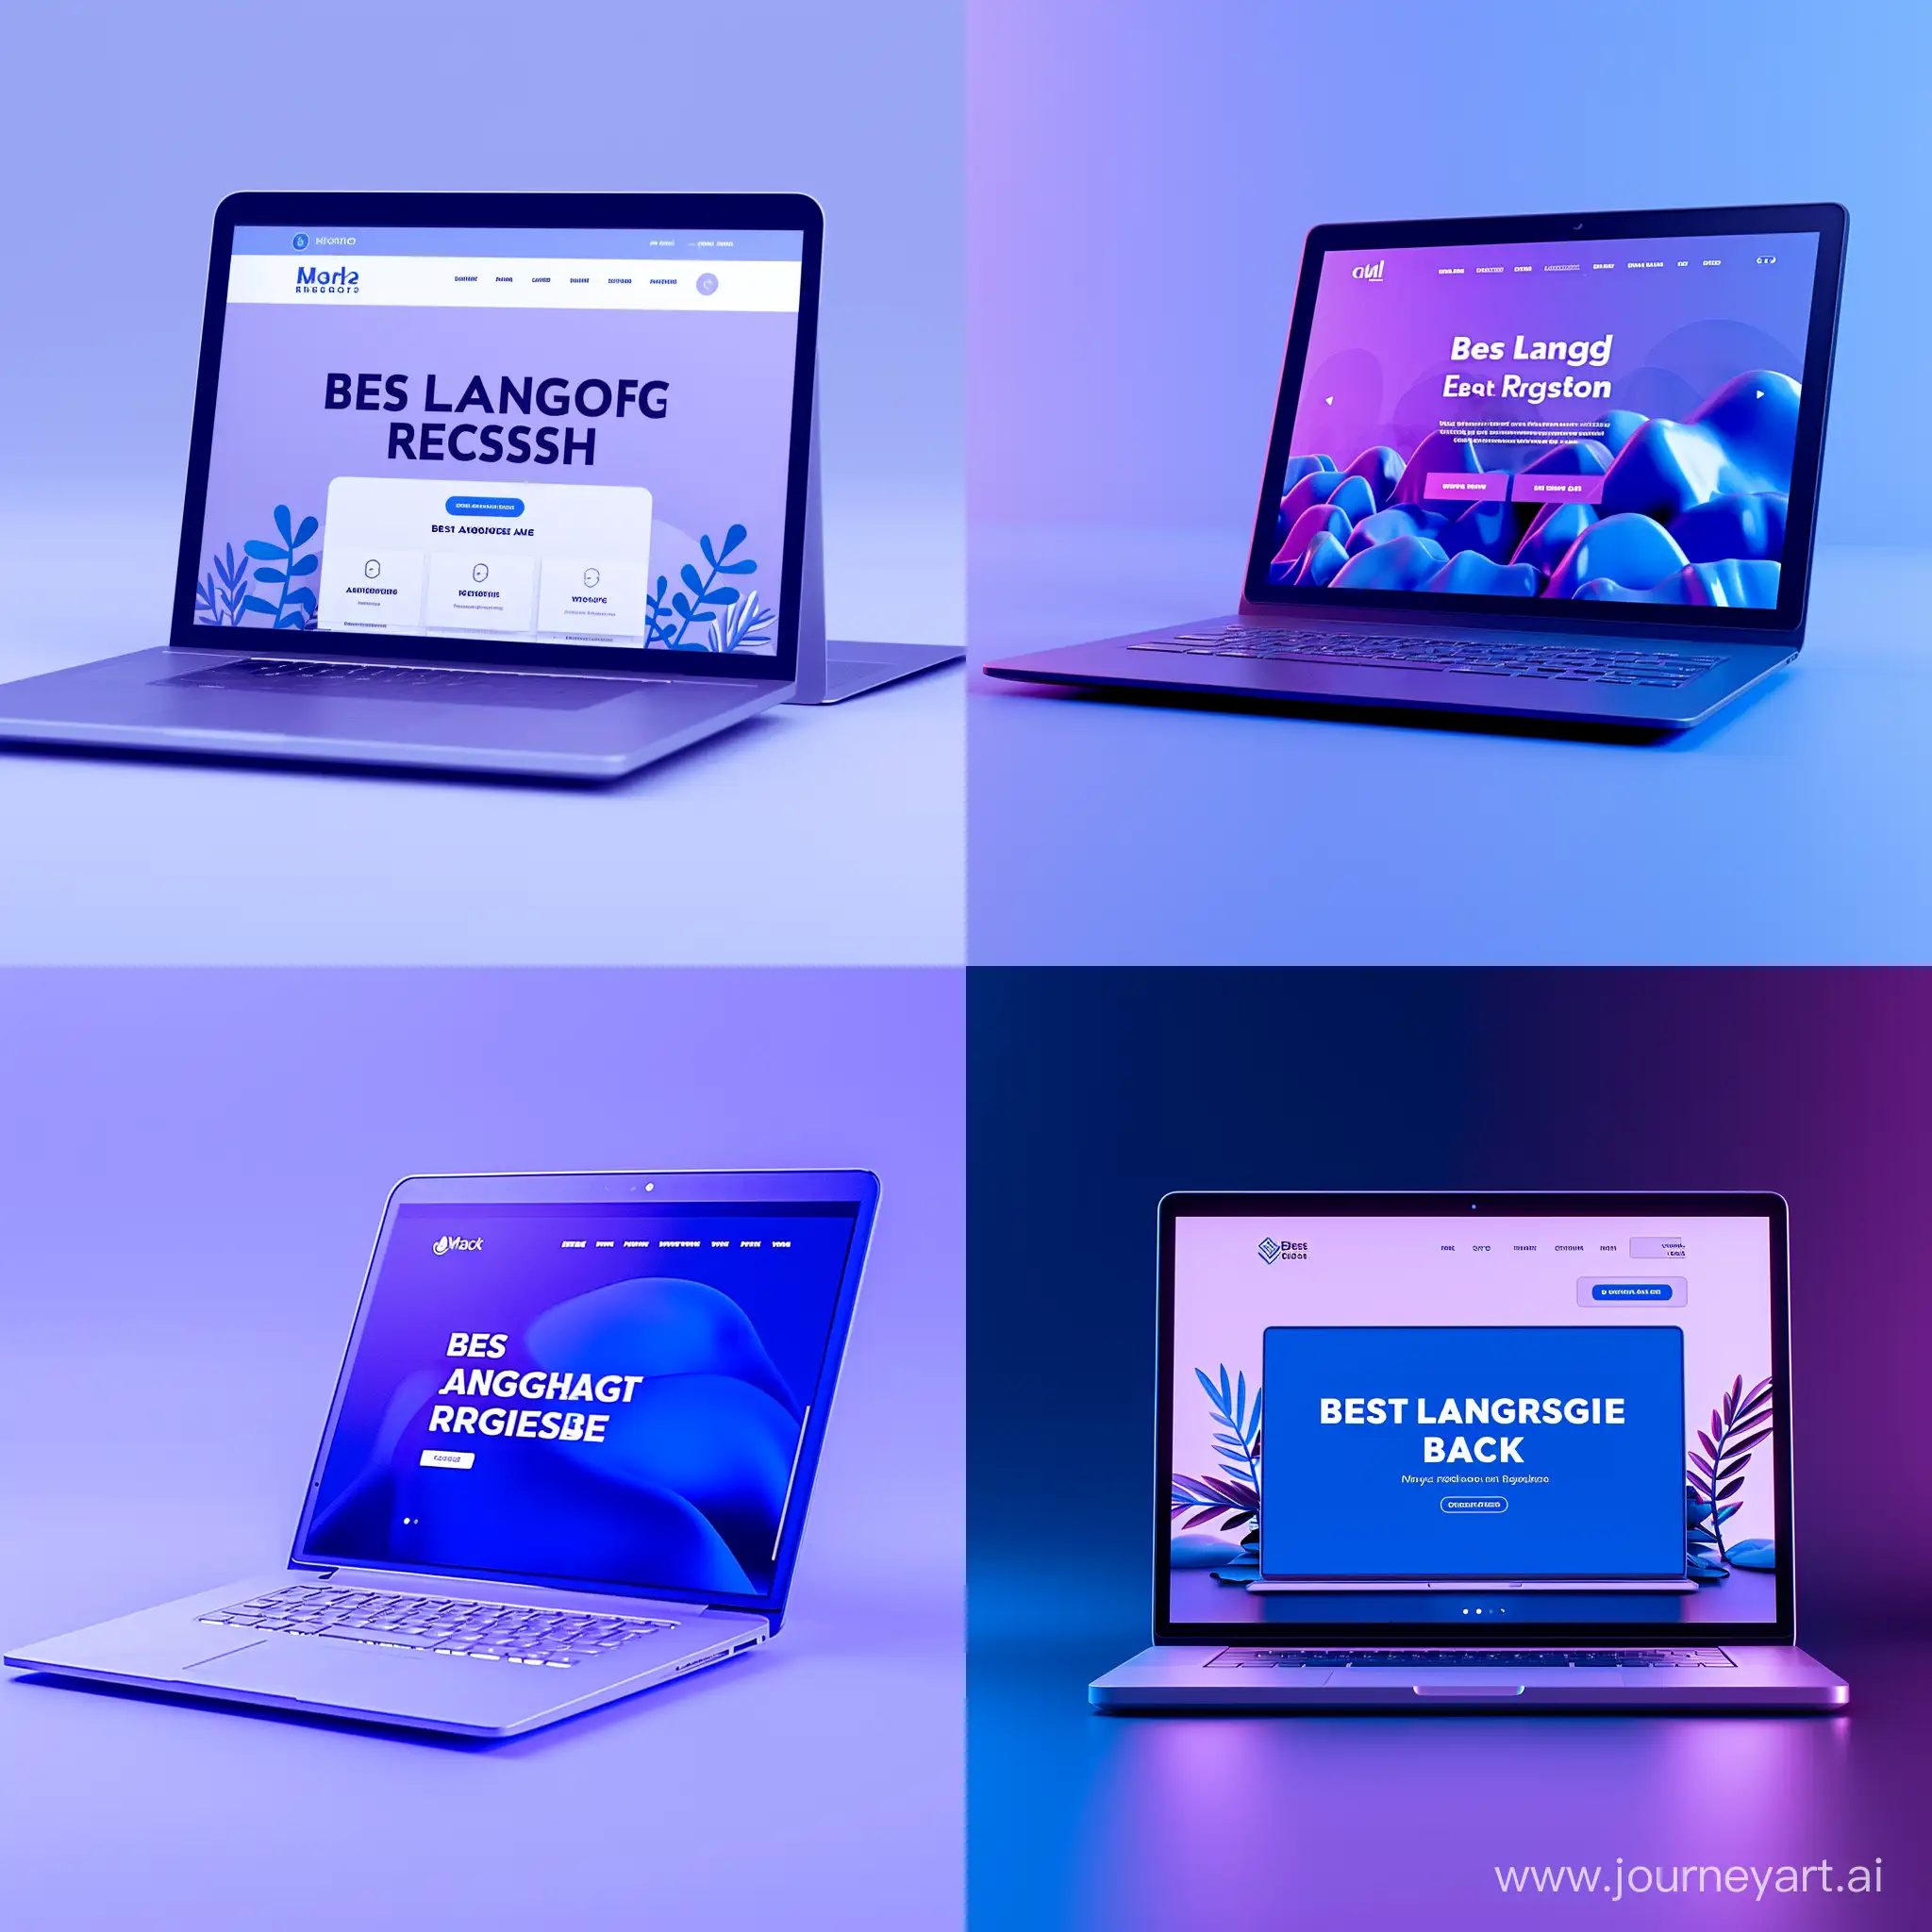 no just create an image with website mockup and write an heading "Best Landing Page Resources" inside the laptop. use blue and purple color scheme